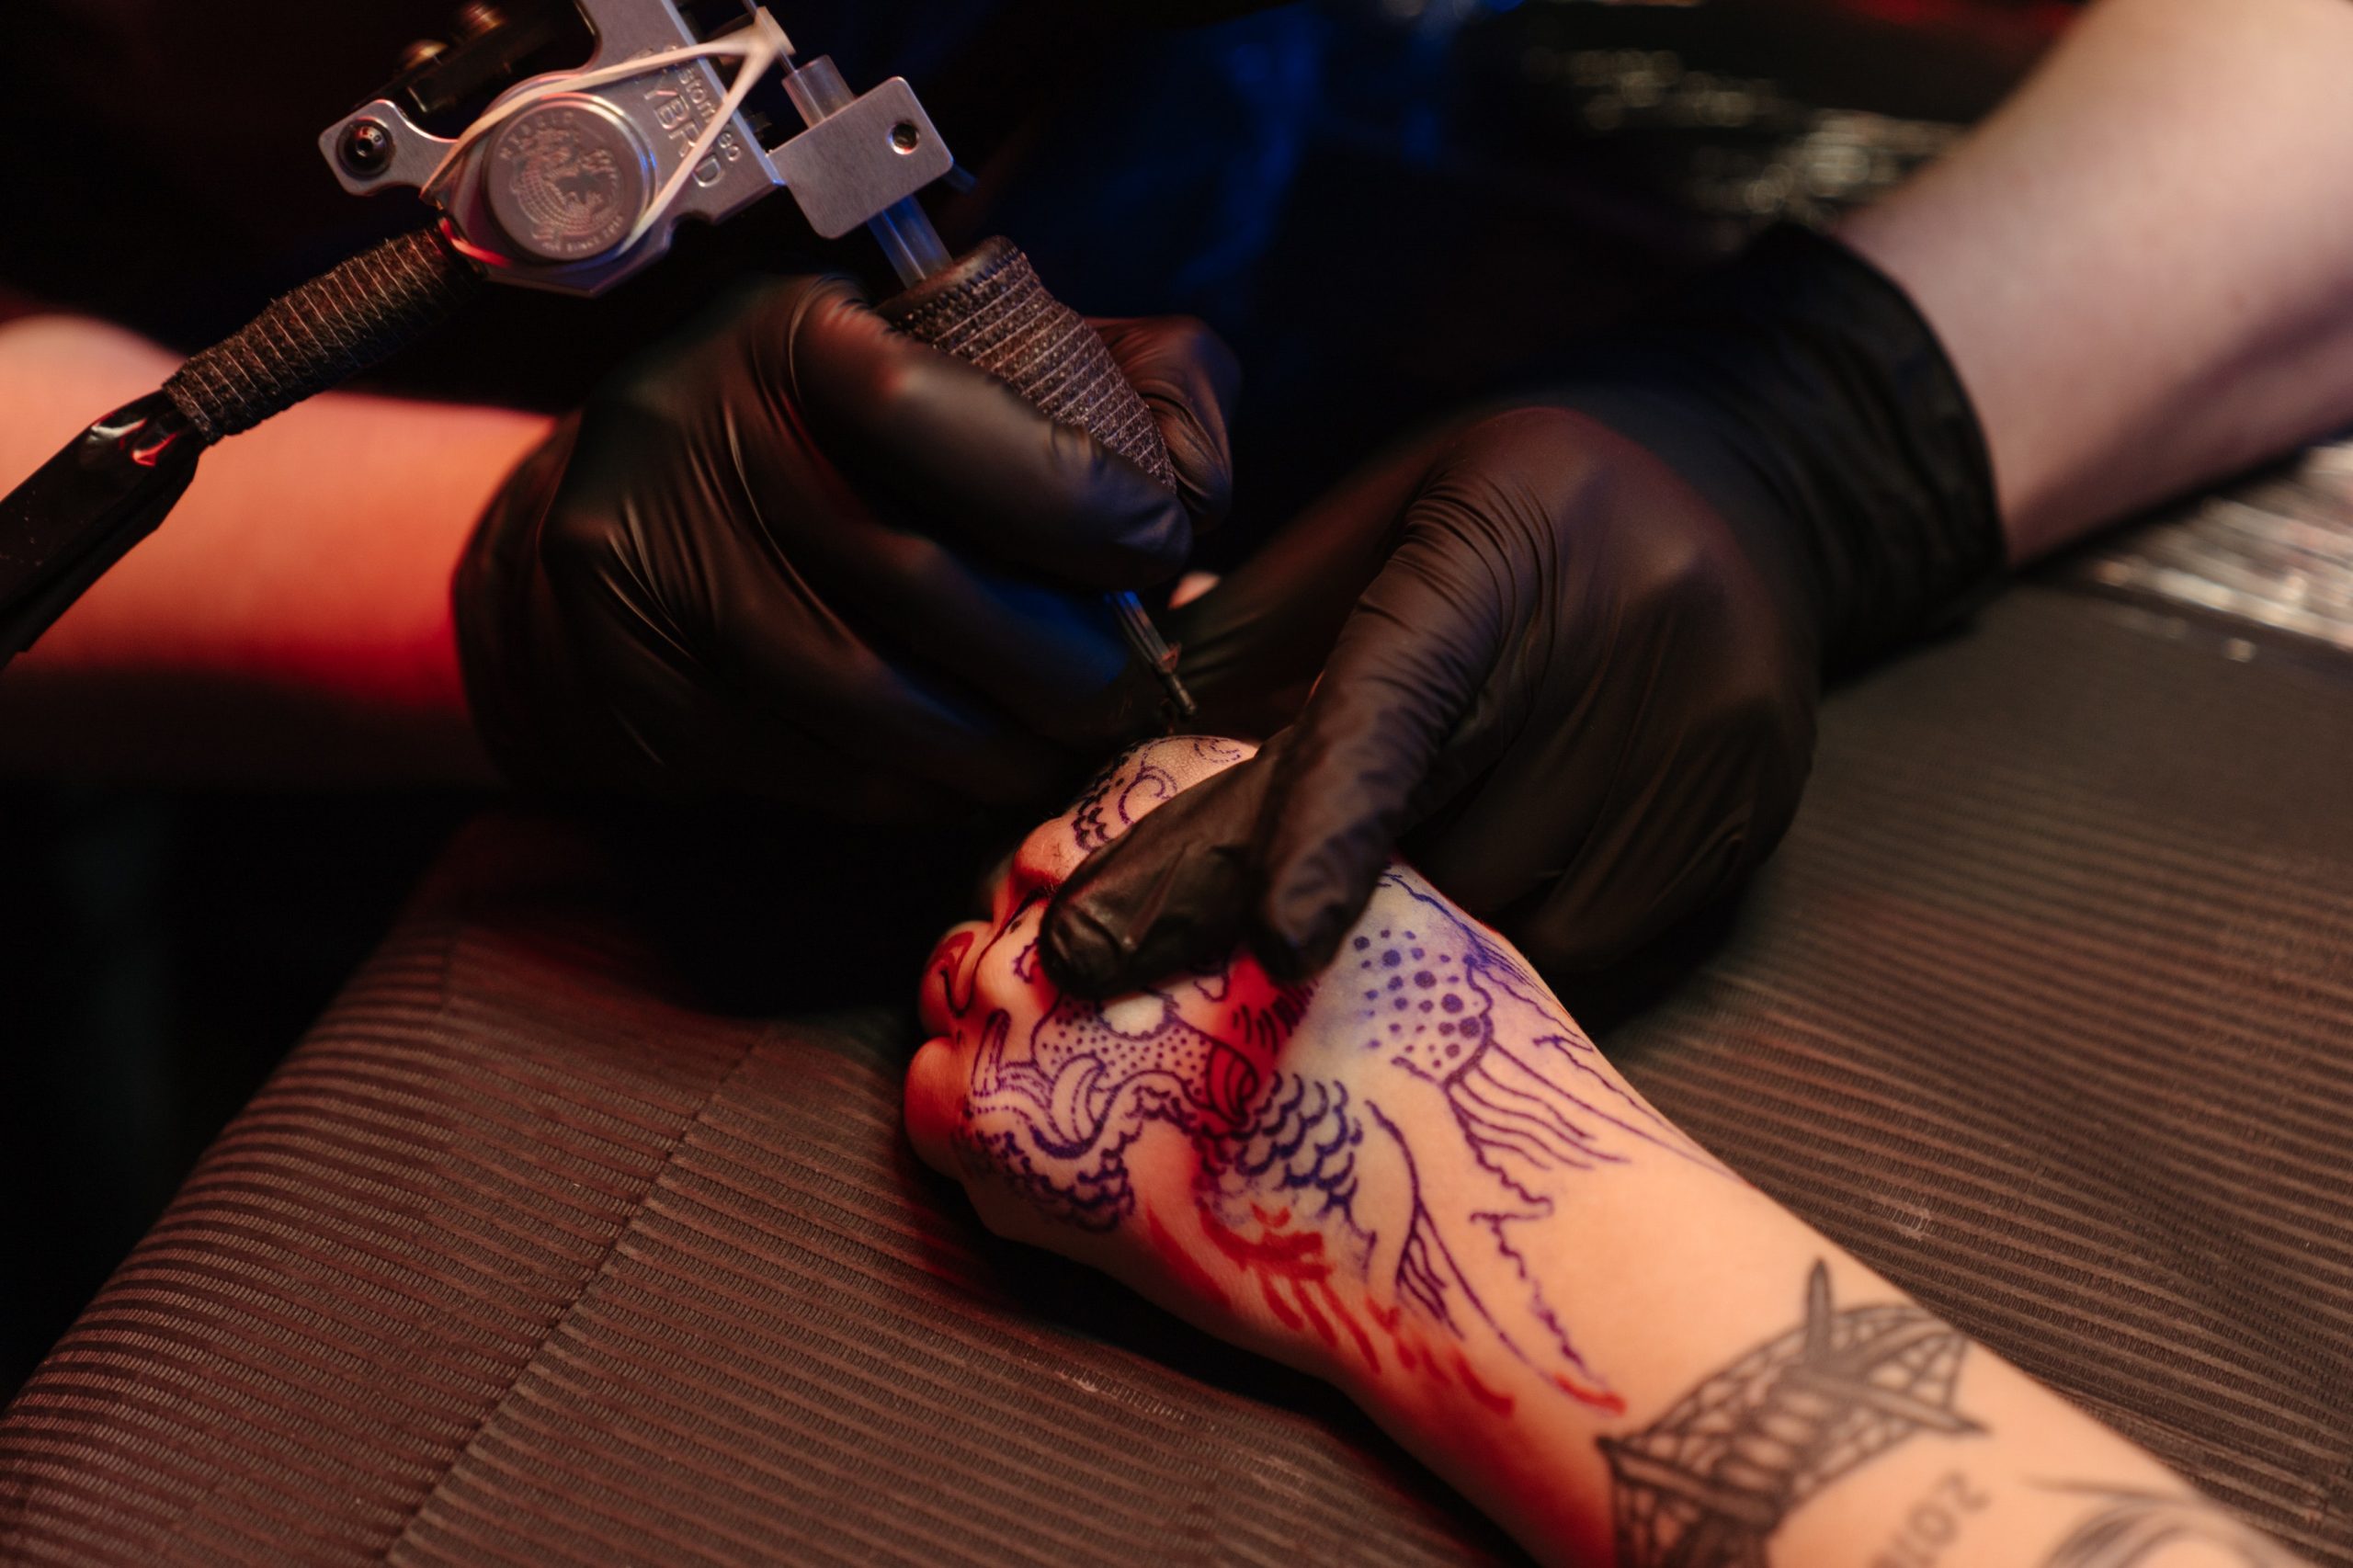 Tattoos & Piercings: Precaution & Safety Over The Trend